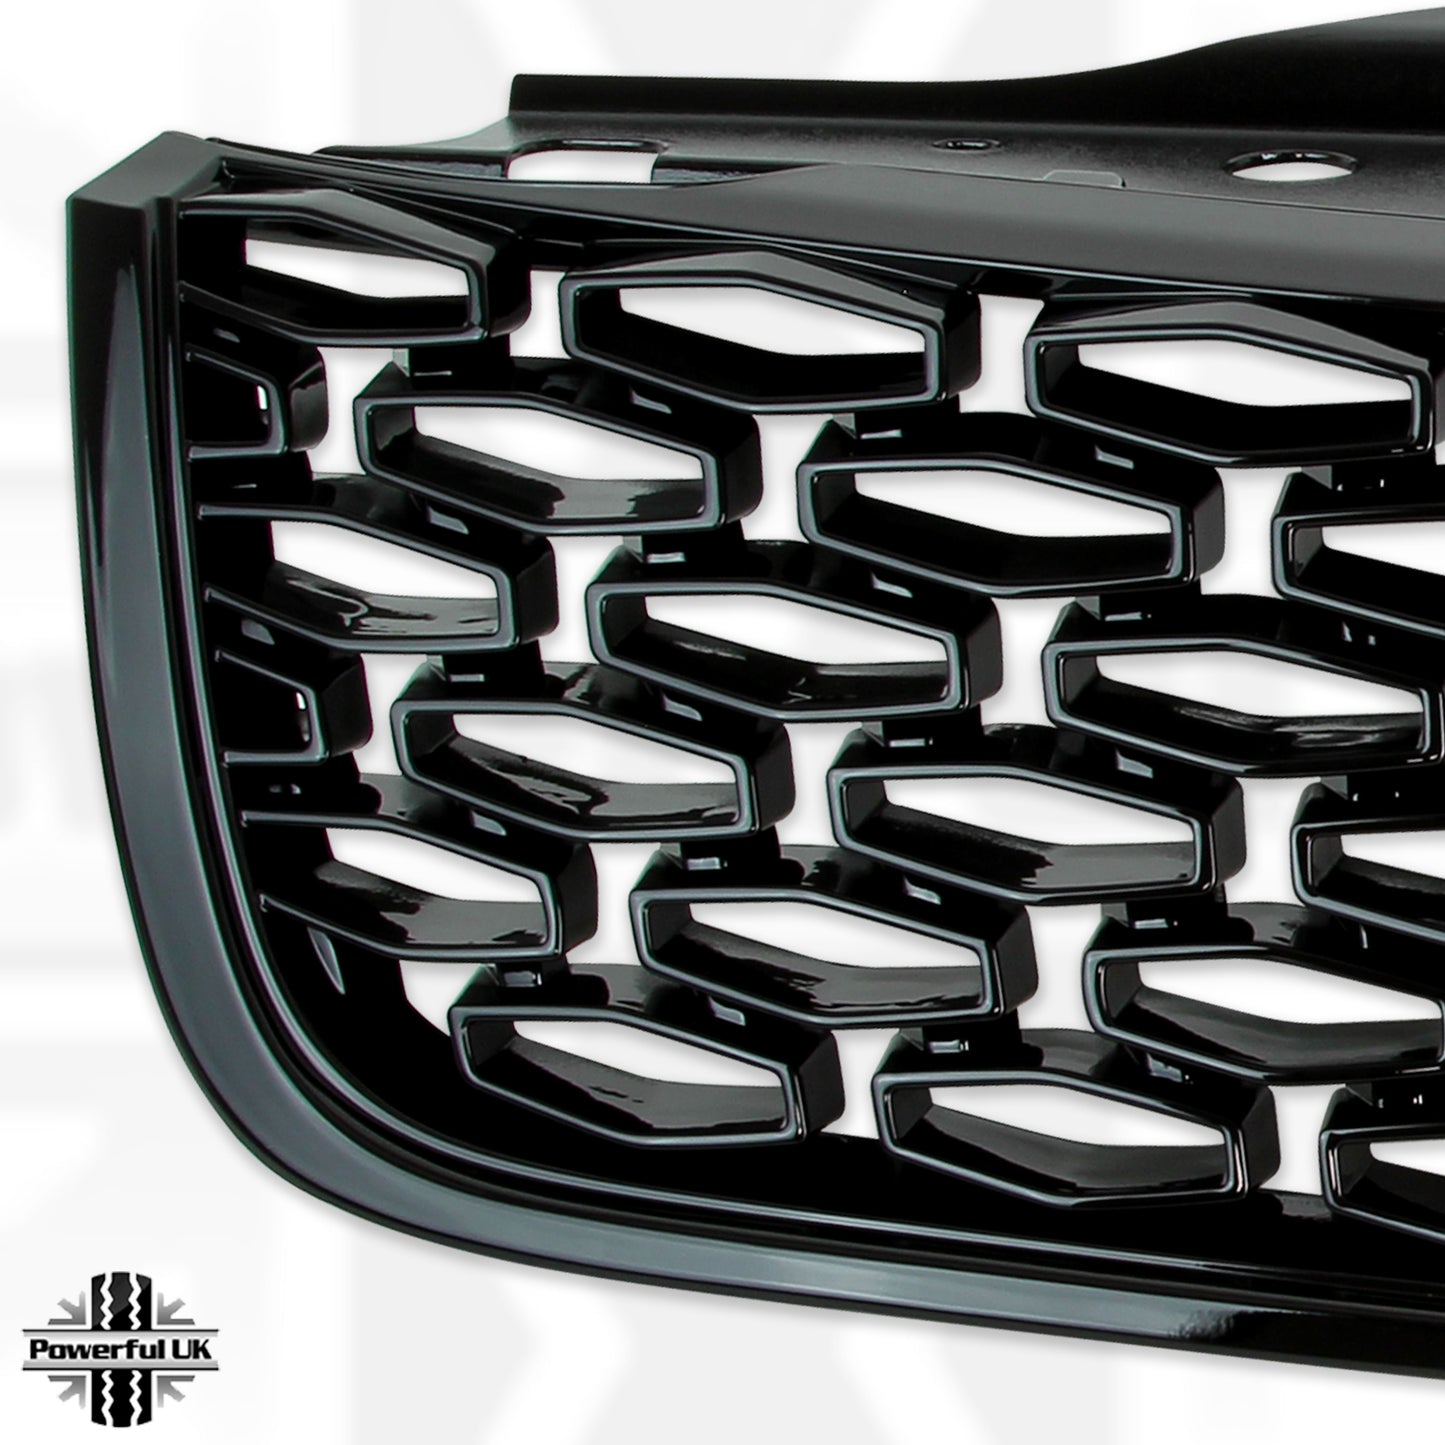 All New Discovery 5 Dynamic Grille - Gloss Black - Aftermarket